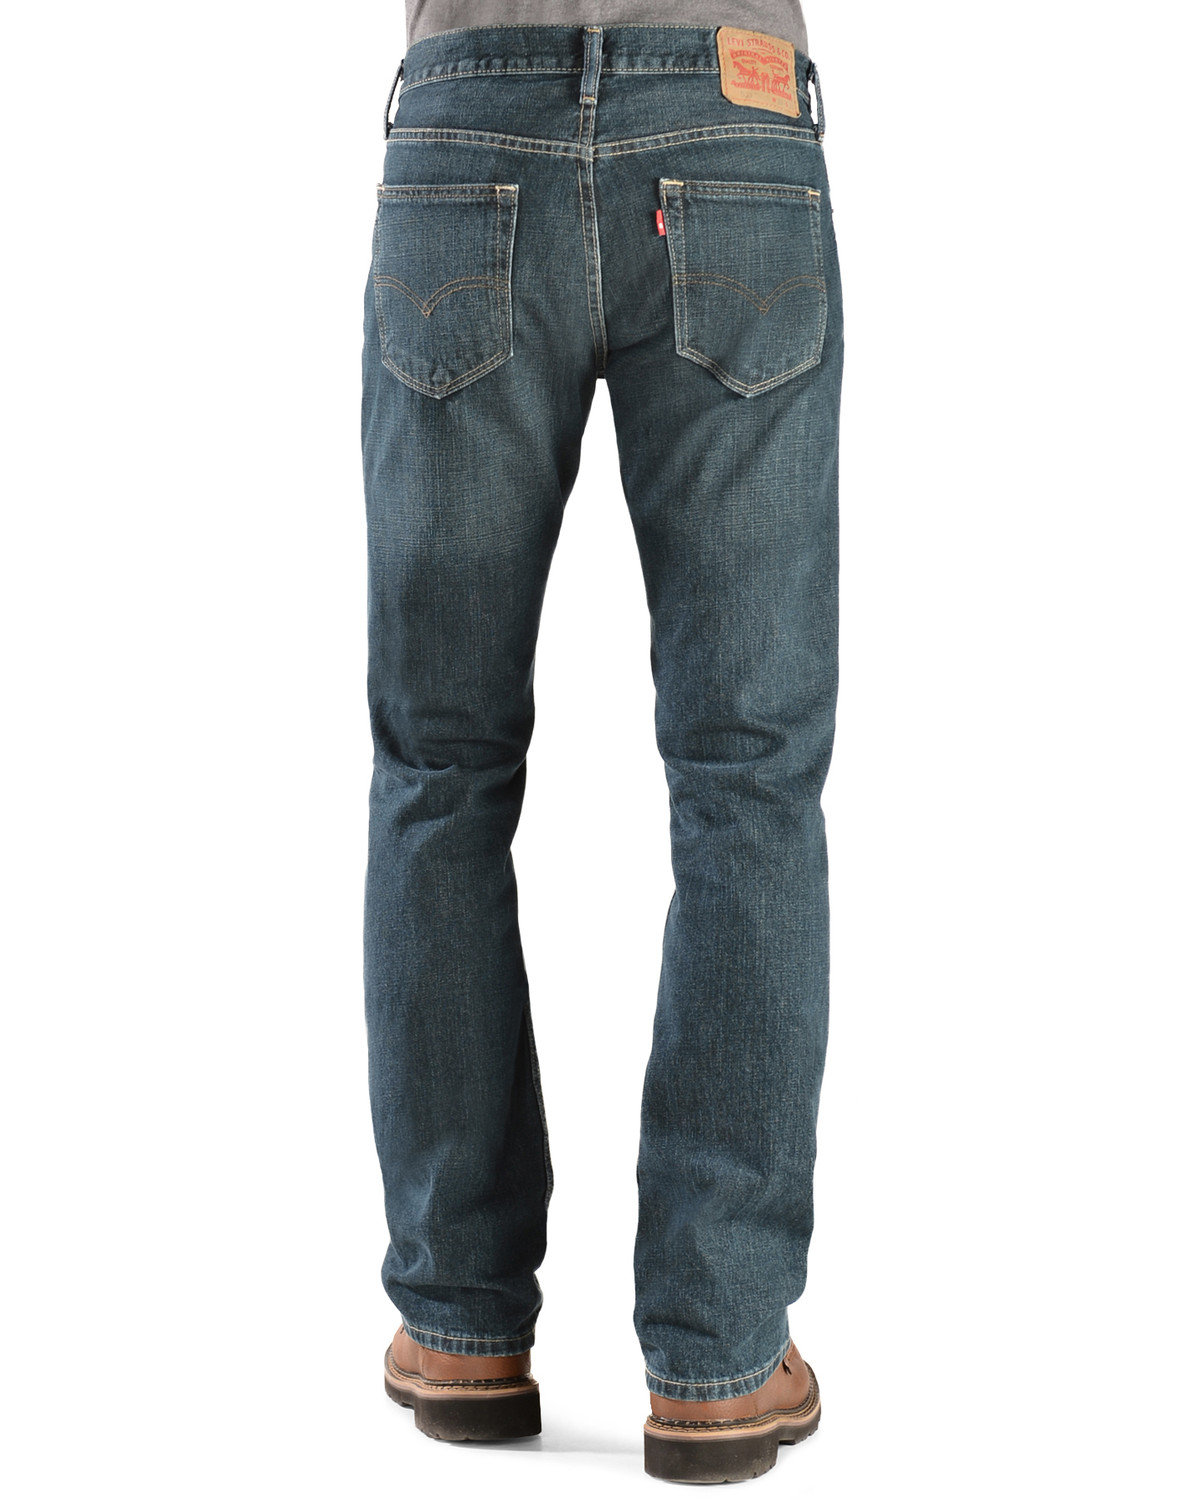 Levi's 527 Jeans - Prewashed Low Rise Boot Cut - Country Outfitter